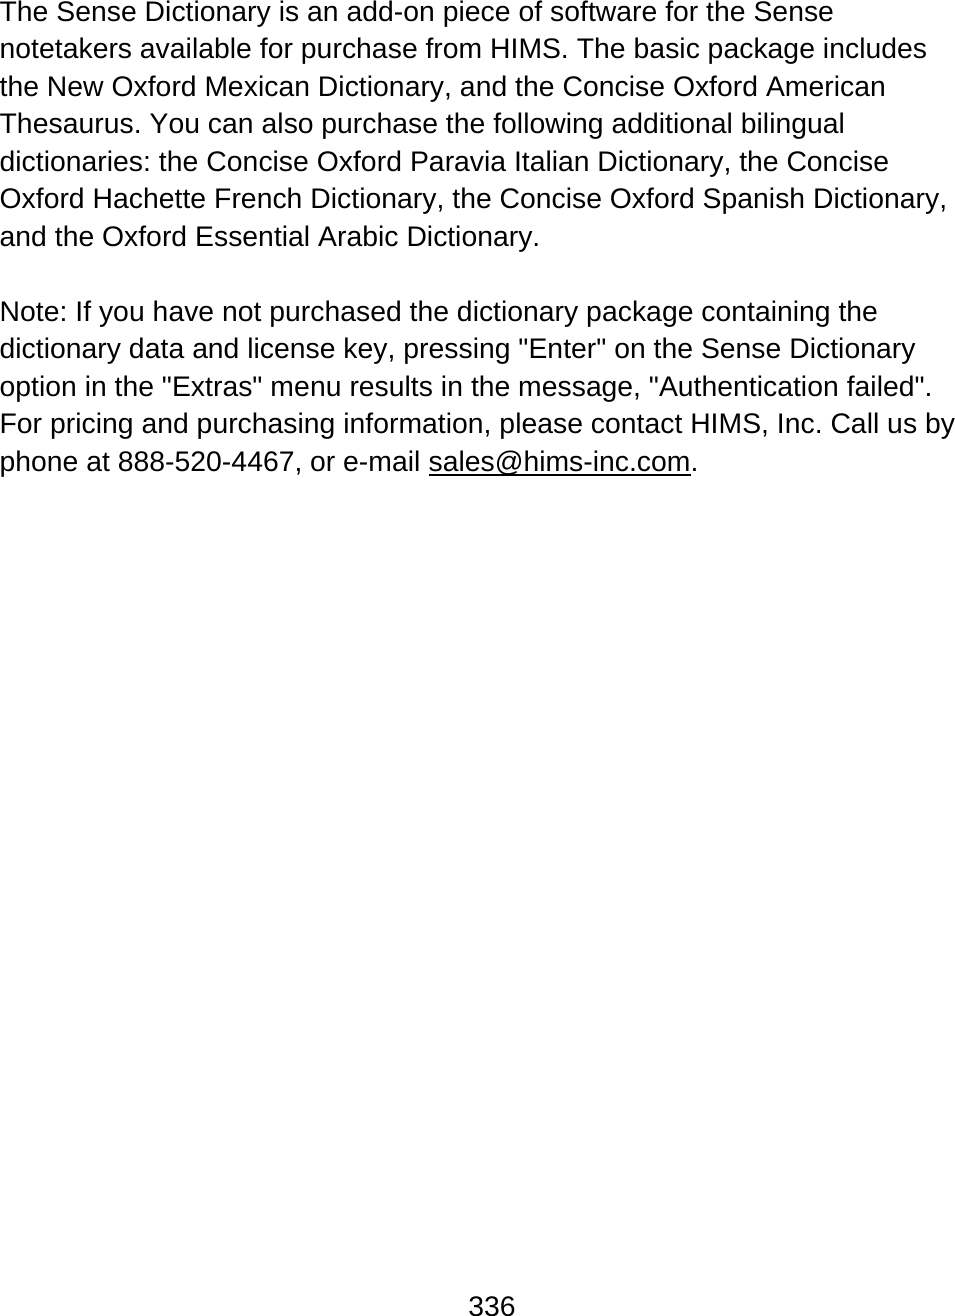 336  The Sense Dictionary is an add-on piece of software for the Sense notetakers available for purchase from HIMS. The basic package includes the New Oxford Mexican Dictionary, and the Concise Oxford American Thesaurus. You can also purchase the following additional bilingual dictionaries: the Concise Oxford Paravia Italian Dictionary, the Concise Oxford Hachette French Dictionary, the Concise Oxford Spanish Dictionary, and the Oxford Essential Arabic Dictionary.  Note: If you have not purchased the dictionary package containing the dictionary data and license key, pressing &quot;Enter&quot; on the Sense Dictionary option in the &quot;Extras&quot; menu results in the message, &quot;Authentication failed&quot;. For pricing and purchasing information, please contact HIMS, Inc. Call us by phone at 888-520-4467, or e-mail sales@hims-inc.com.                      